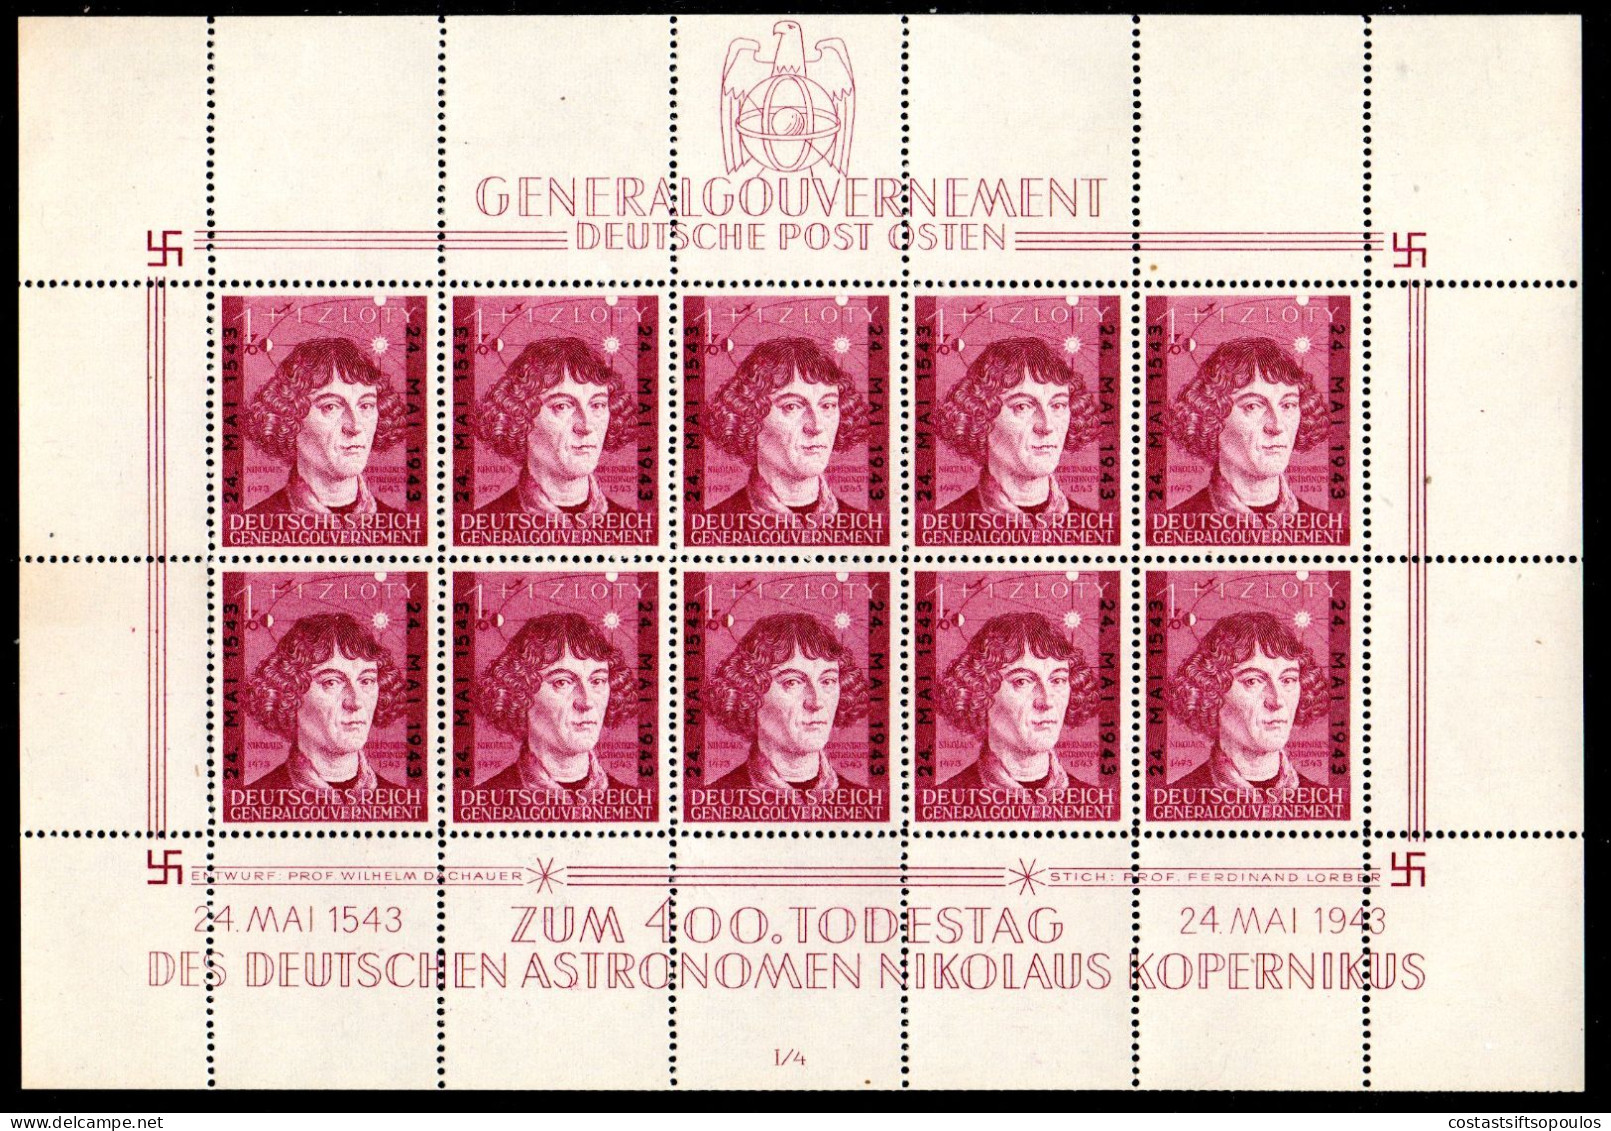 1542.1943 GENERALGOUVERNEMENT KOPERNIKUS SHEETLETS(2) I/4,II/1 MNH(**)VERY FINE AND FRESH,5 SCANS - General Government